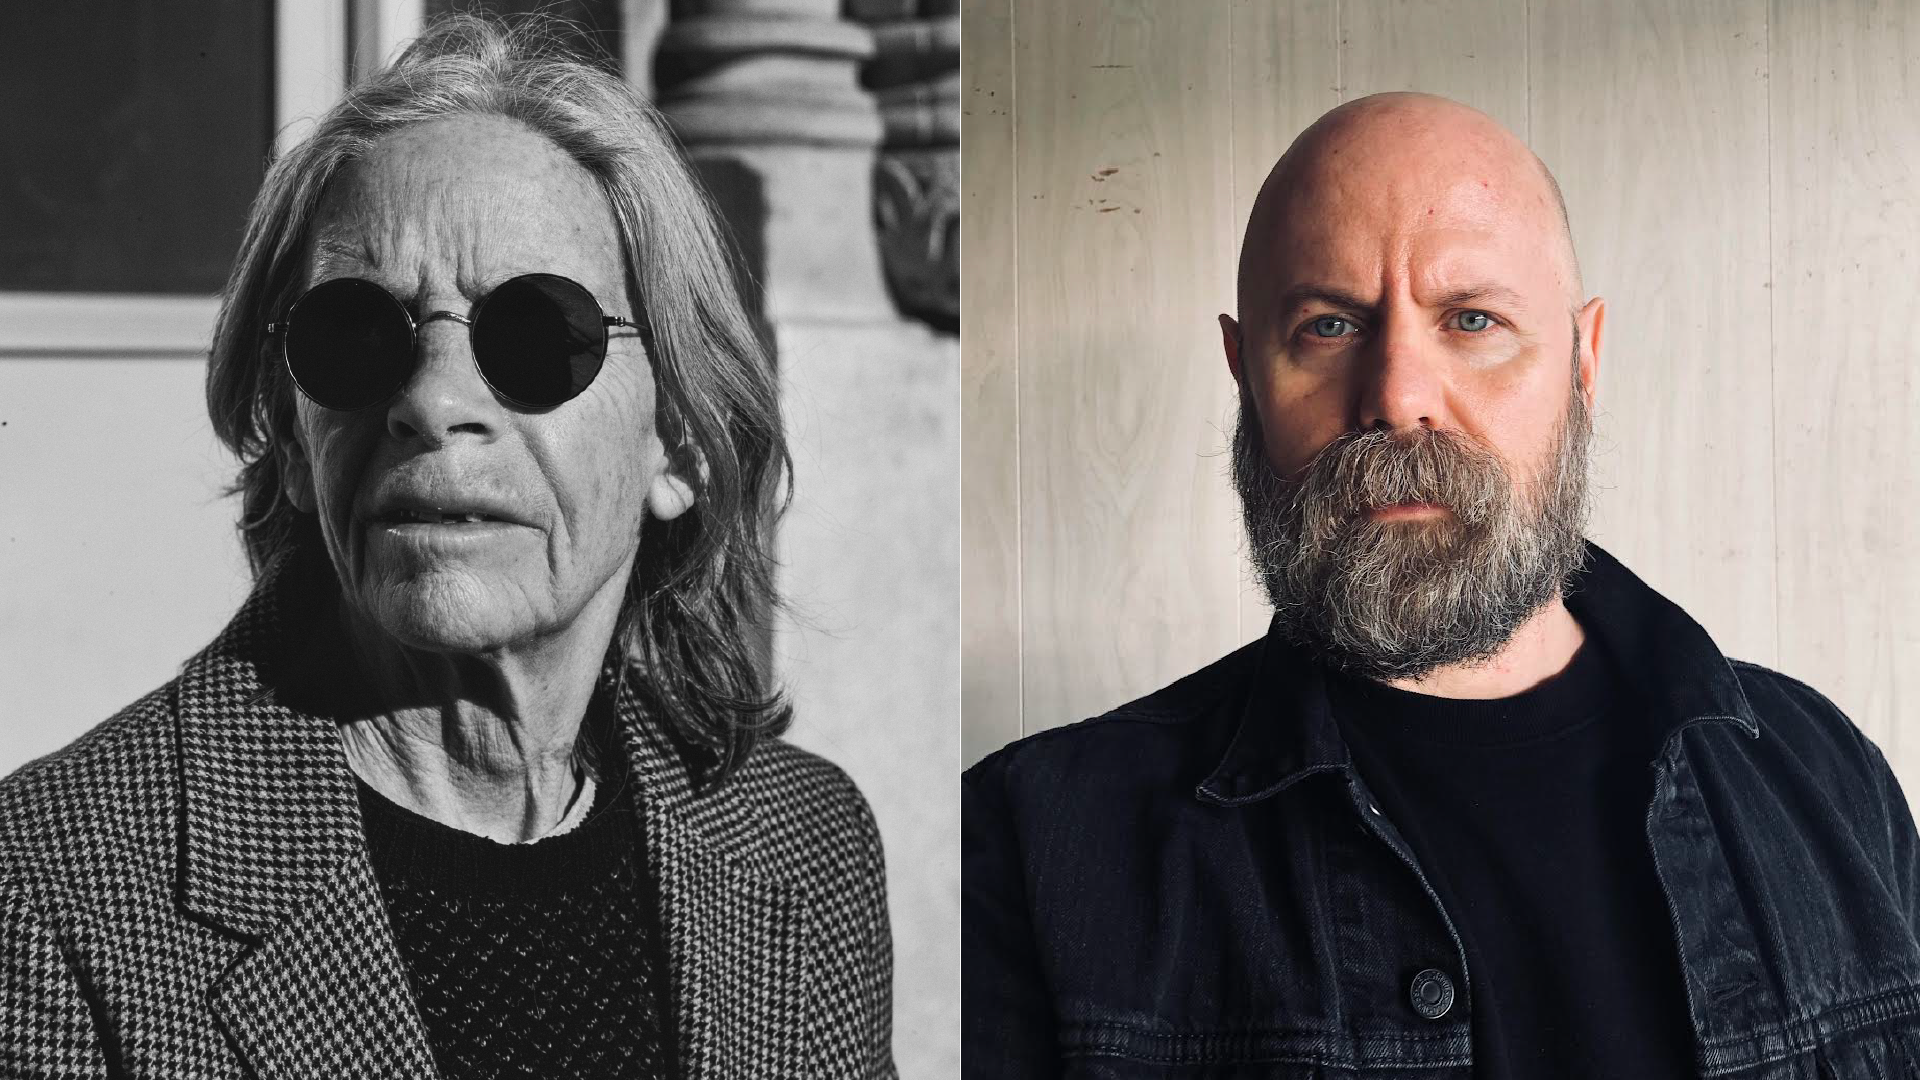 Author portraits, Eileen Myles in balck and white on the left, Nate Lippens in full color on the right.